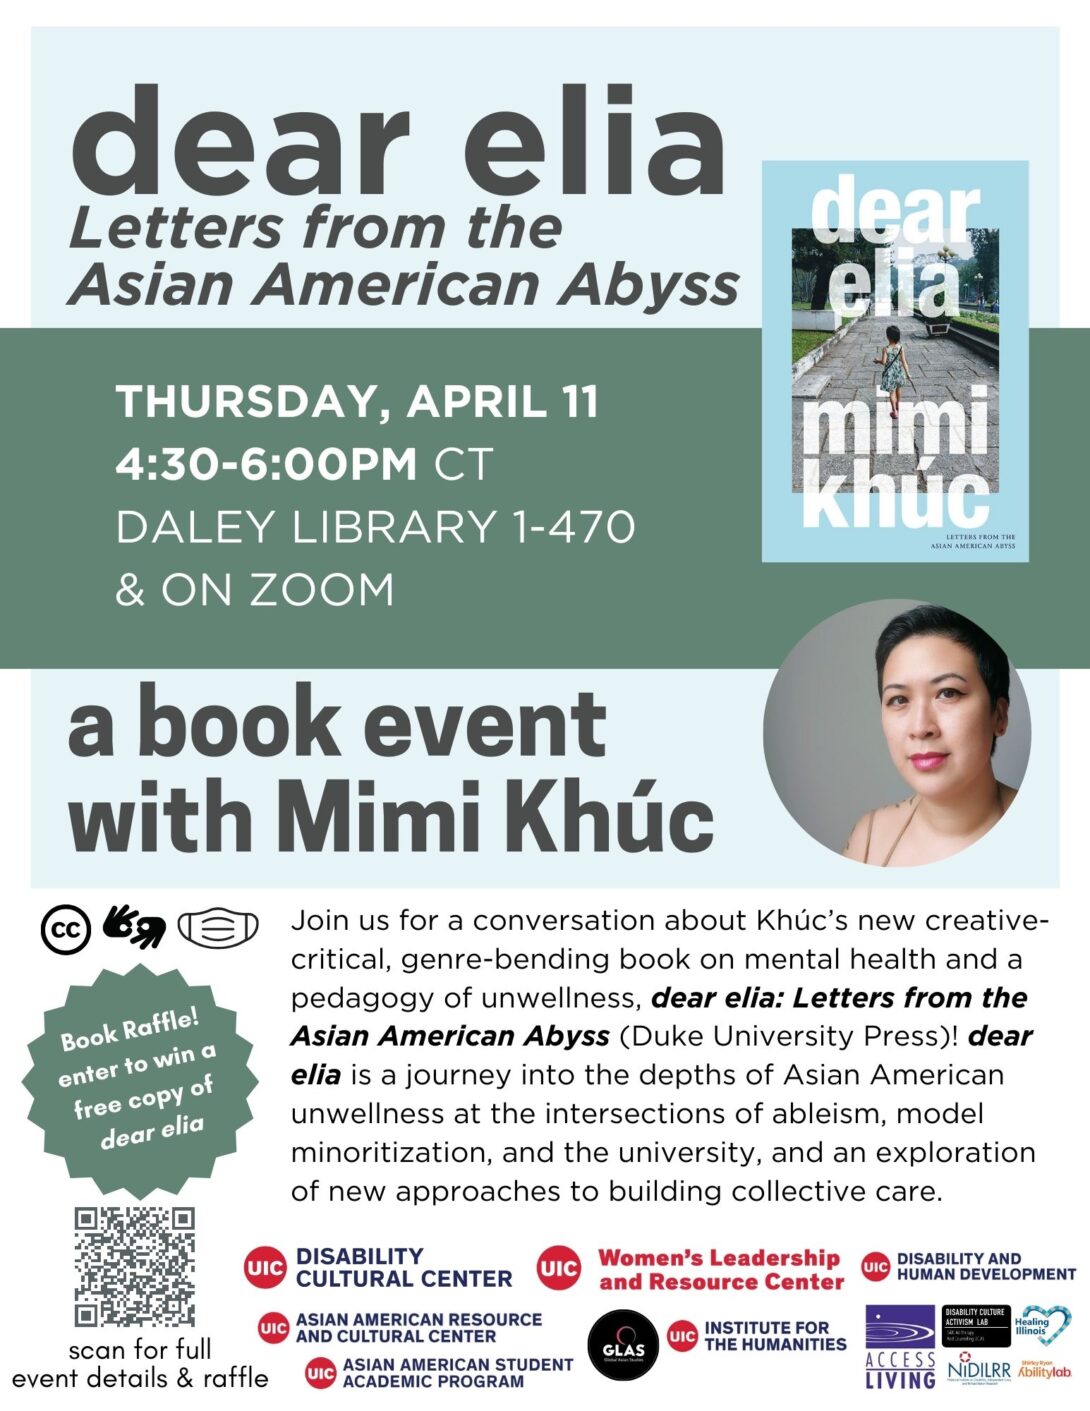 Promotional poster: The top of the flyer has a pale blue square in with a band of muted green stretching across the page horizontally. Large dark gray text has the title of the event. To the right is an image of the dear elia book cover, which is light blue and has a photo of a small child on a gray sidewalk facing away from the camera. Below is a photo of Mimi Khúc. On the bottom half of the flyer are icons for captions, ASL, and masking. A wavy-edged green circle announces the book raffle. There is also an event description and a number of logos for the hosts and co-sponsors. A QR code at the lower left leads to the full event website.